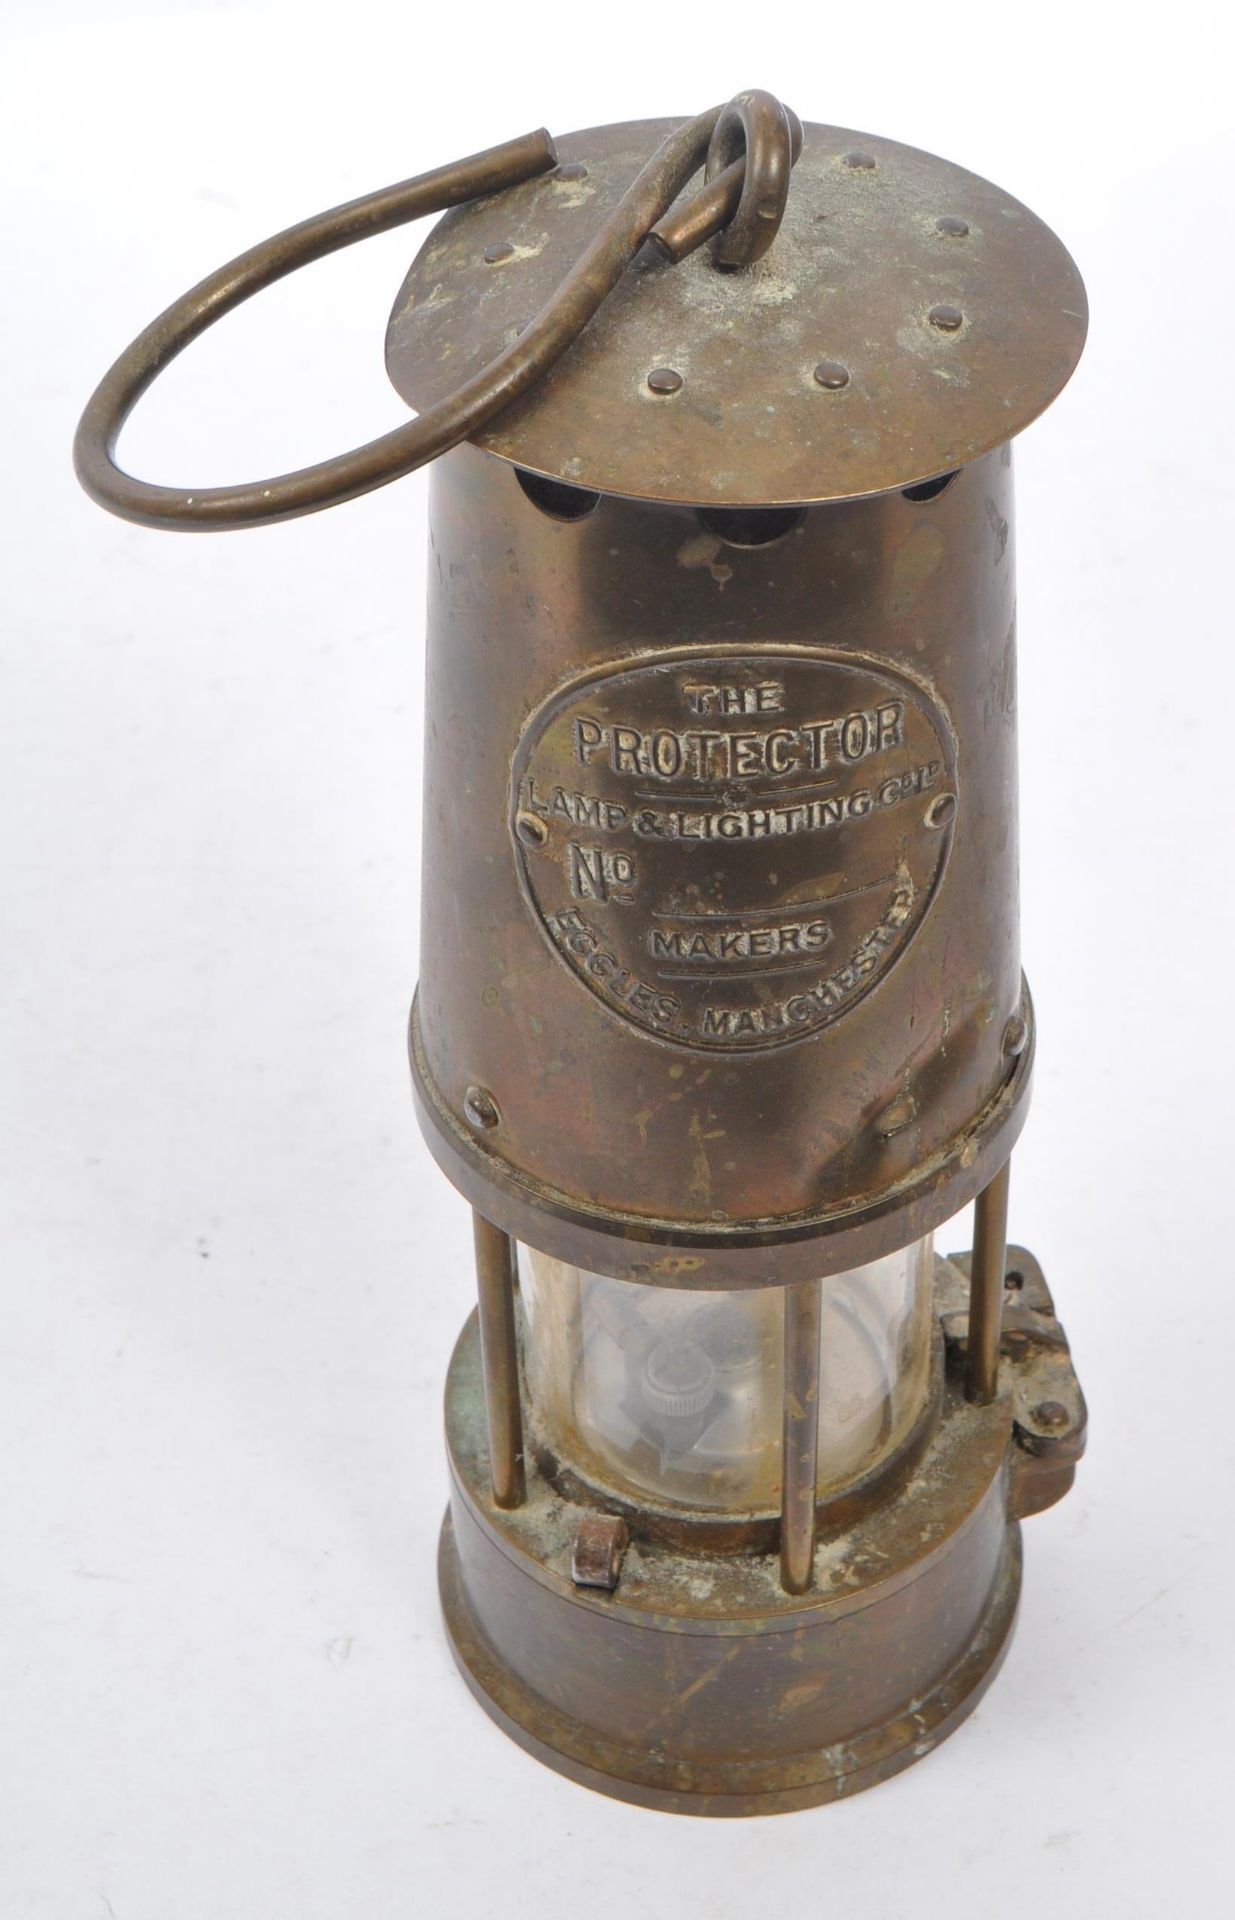 THE PROTECTOR LAMP & LIGHTING - BRASS MINERS LAMP - Image 6 of 6